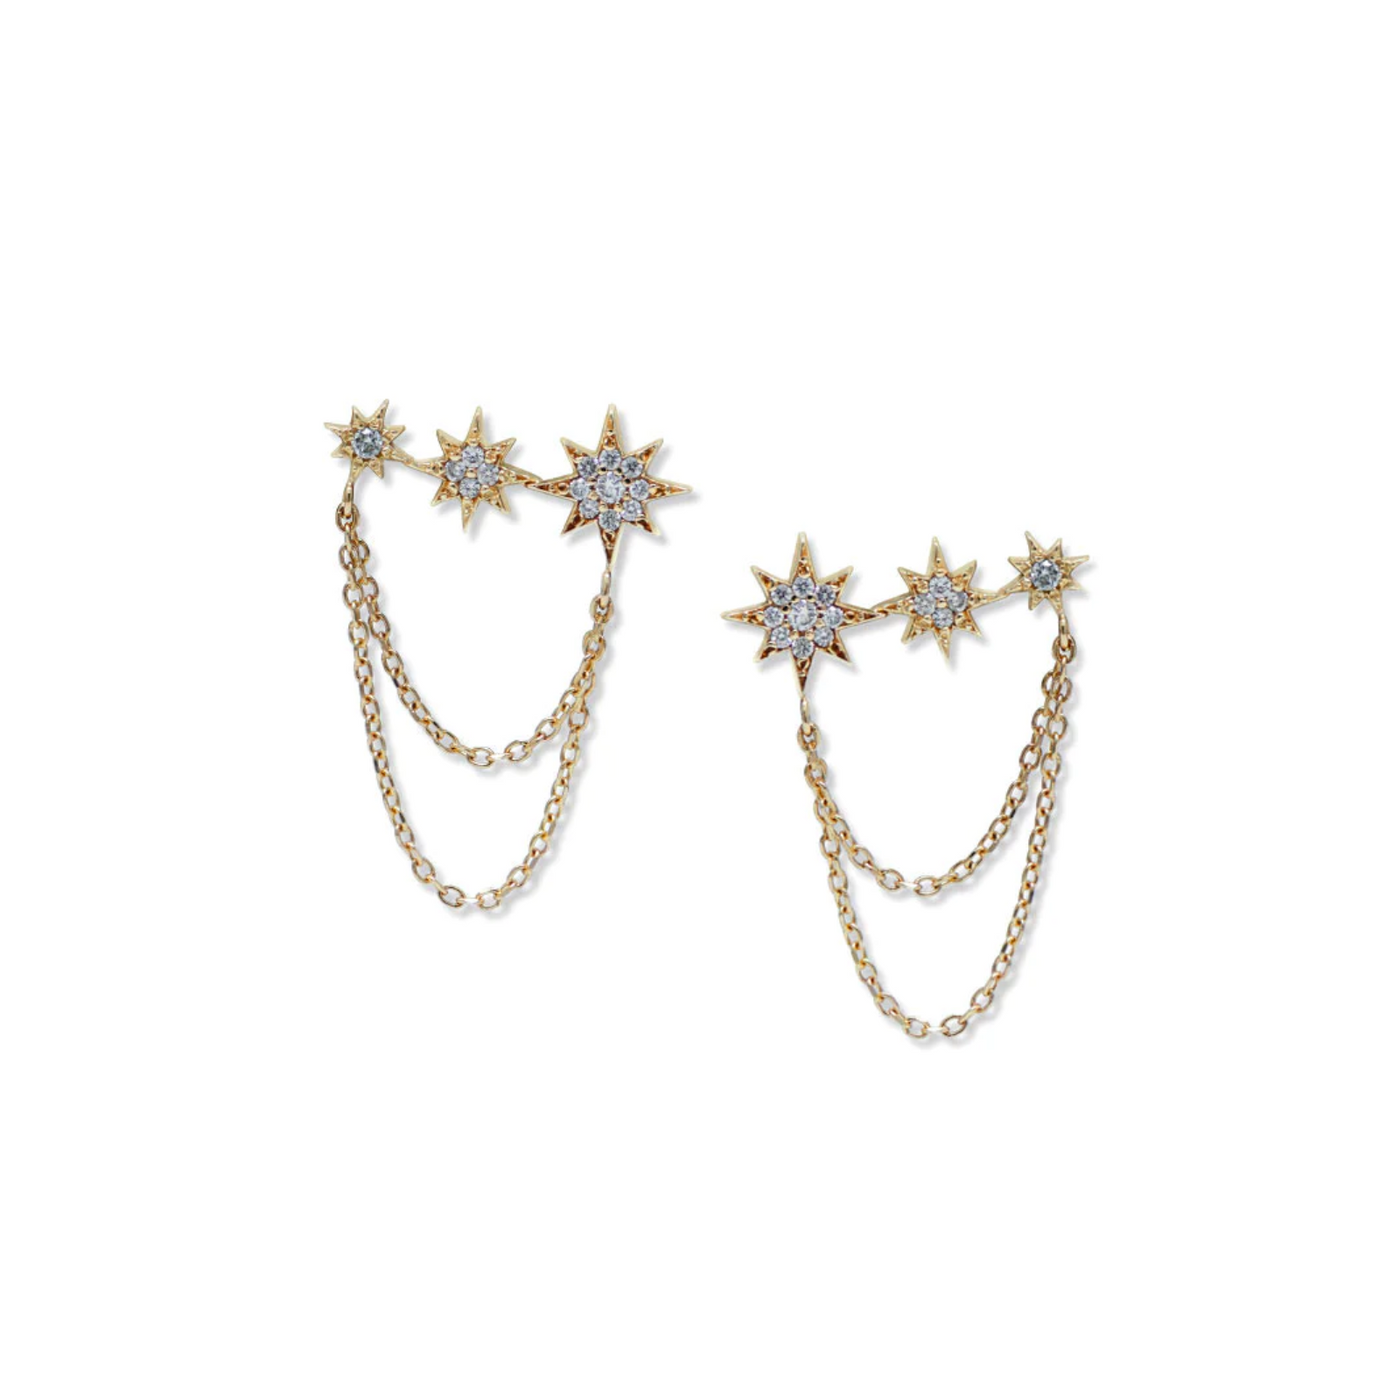 Aztec North Star Trio with Chain Earrings - Single